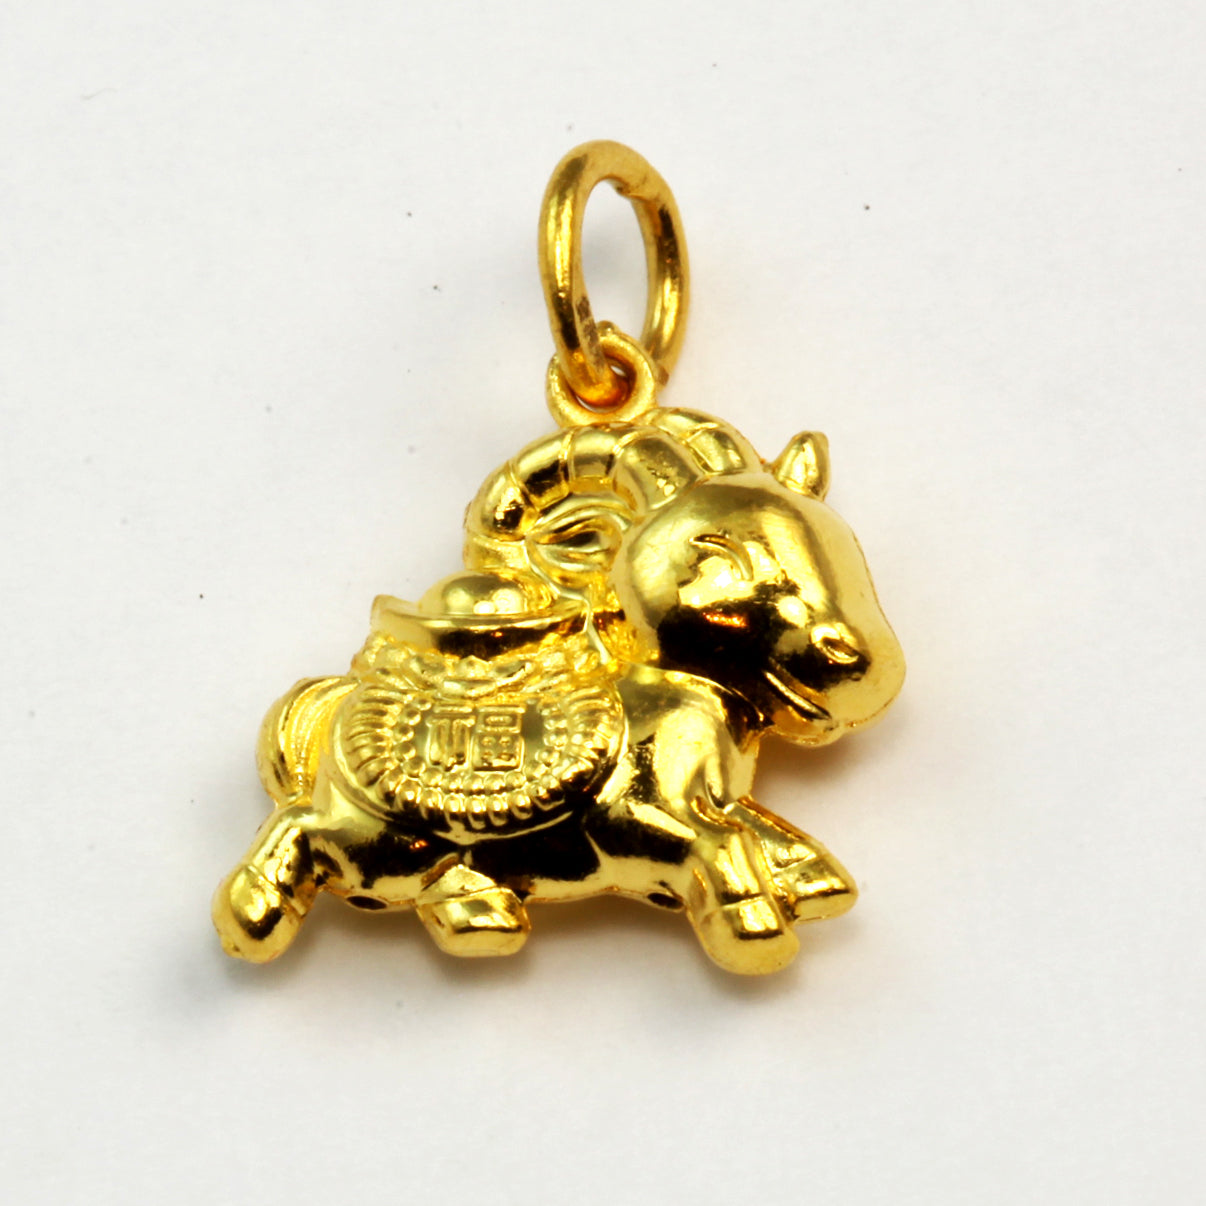 24K Solid Yellow Gold 3D Horse Pendant 2.96 Grams